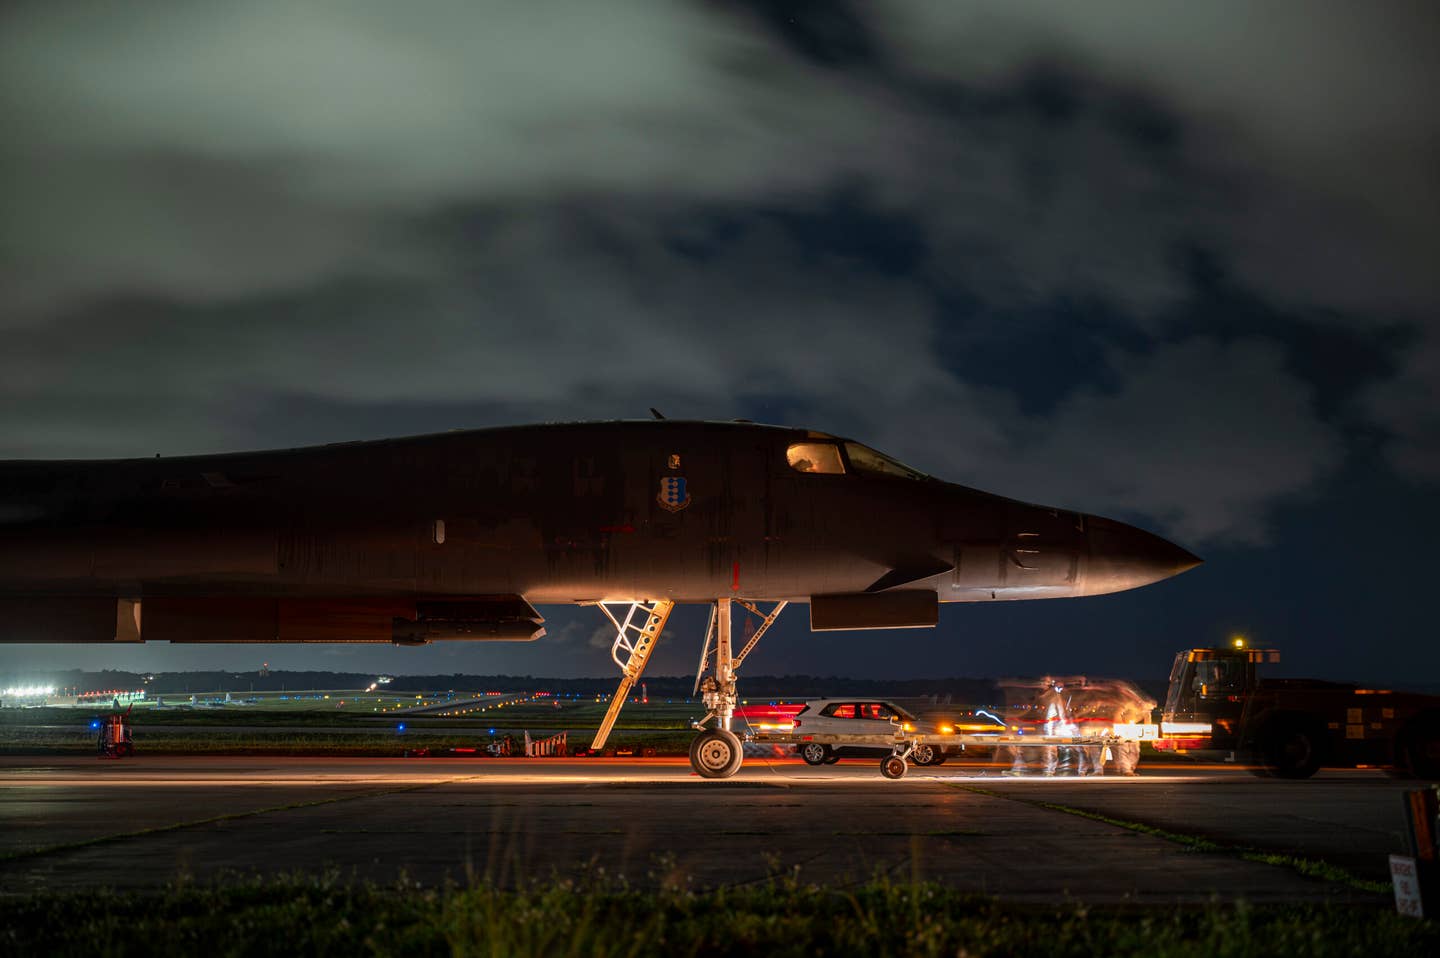 Service members from the 34th Aircraft Maintenance Unit perform post-flight checks on a B-1B of the 34th Expeditionary Bomb Squadron, at Andersen Air Force Base. The Lancer had just returned from a Bomber Task Force mission with the Royal Australian Air Force, June 20, 2022. <em>U.S. Air Force photo by Master Sgt. Nicholas Priest</em>